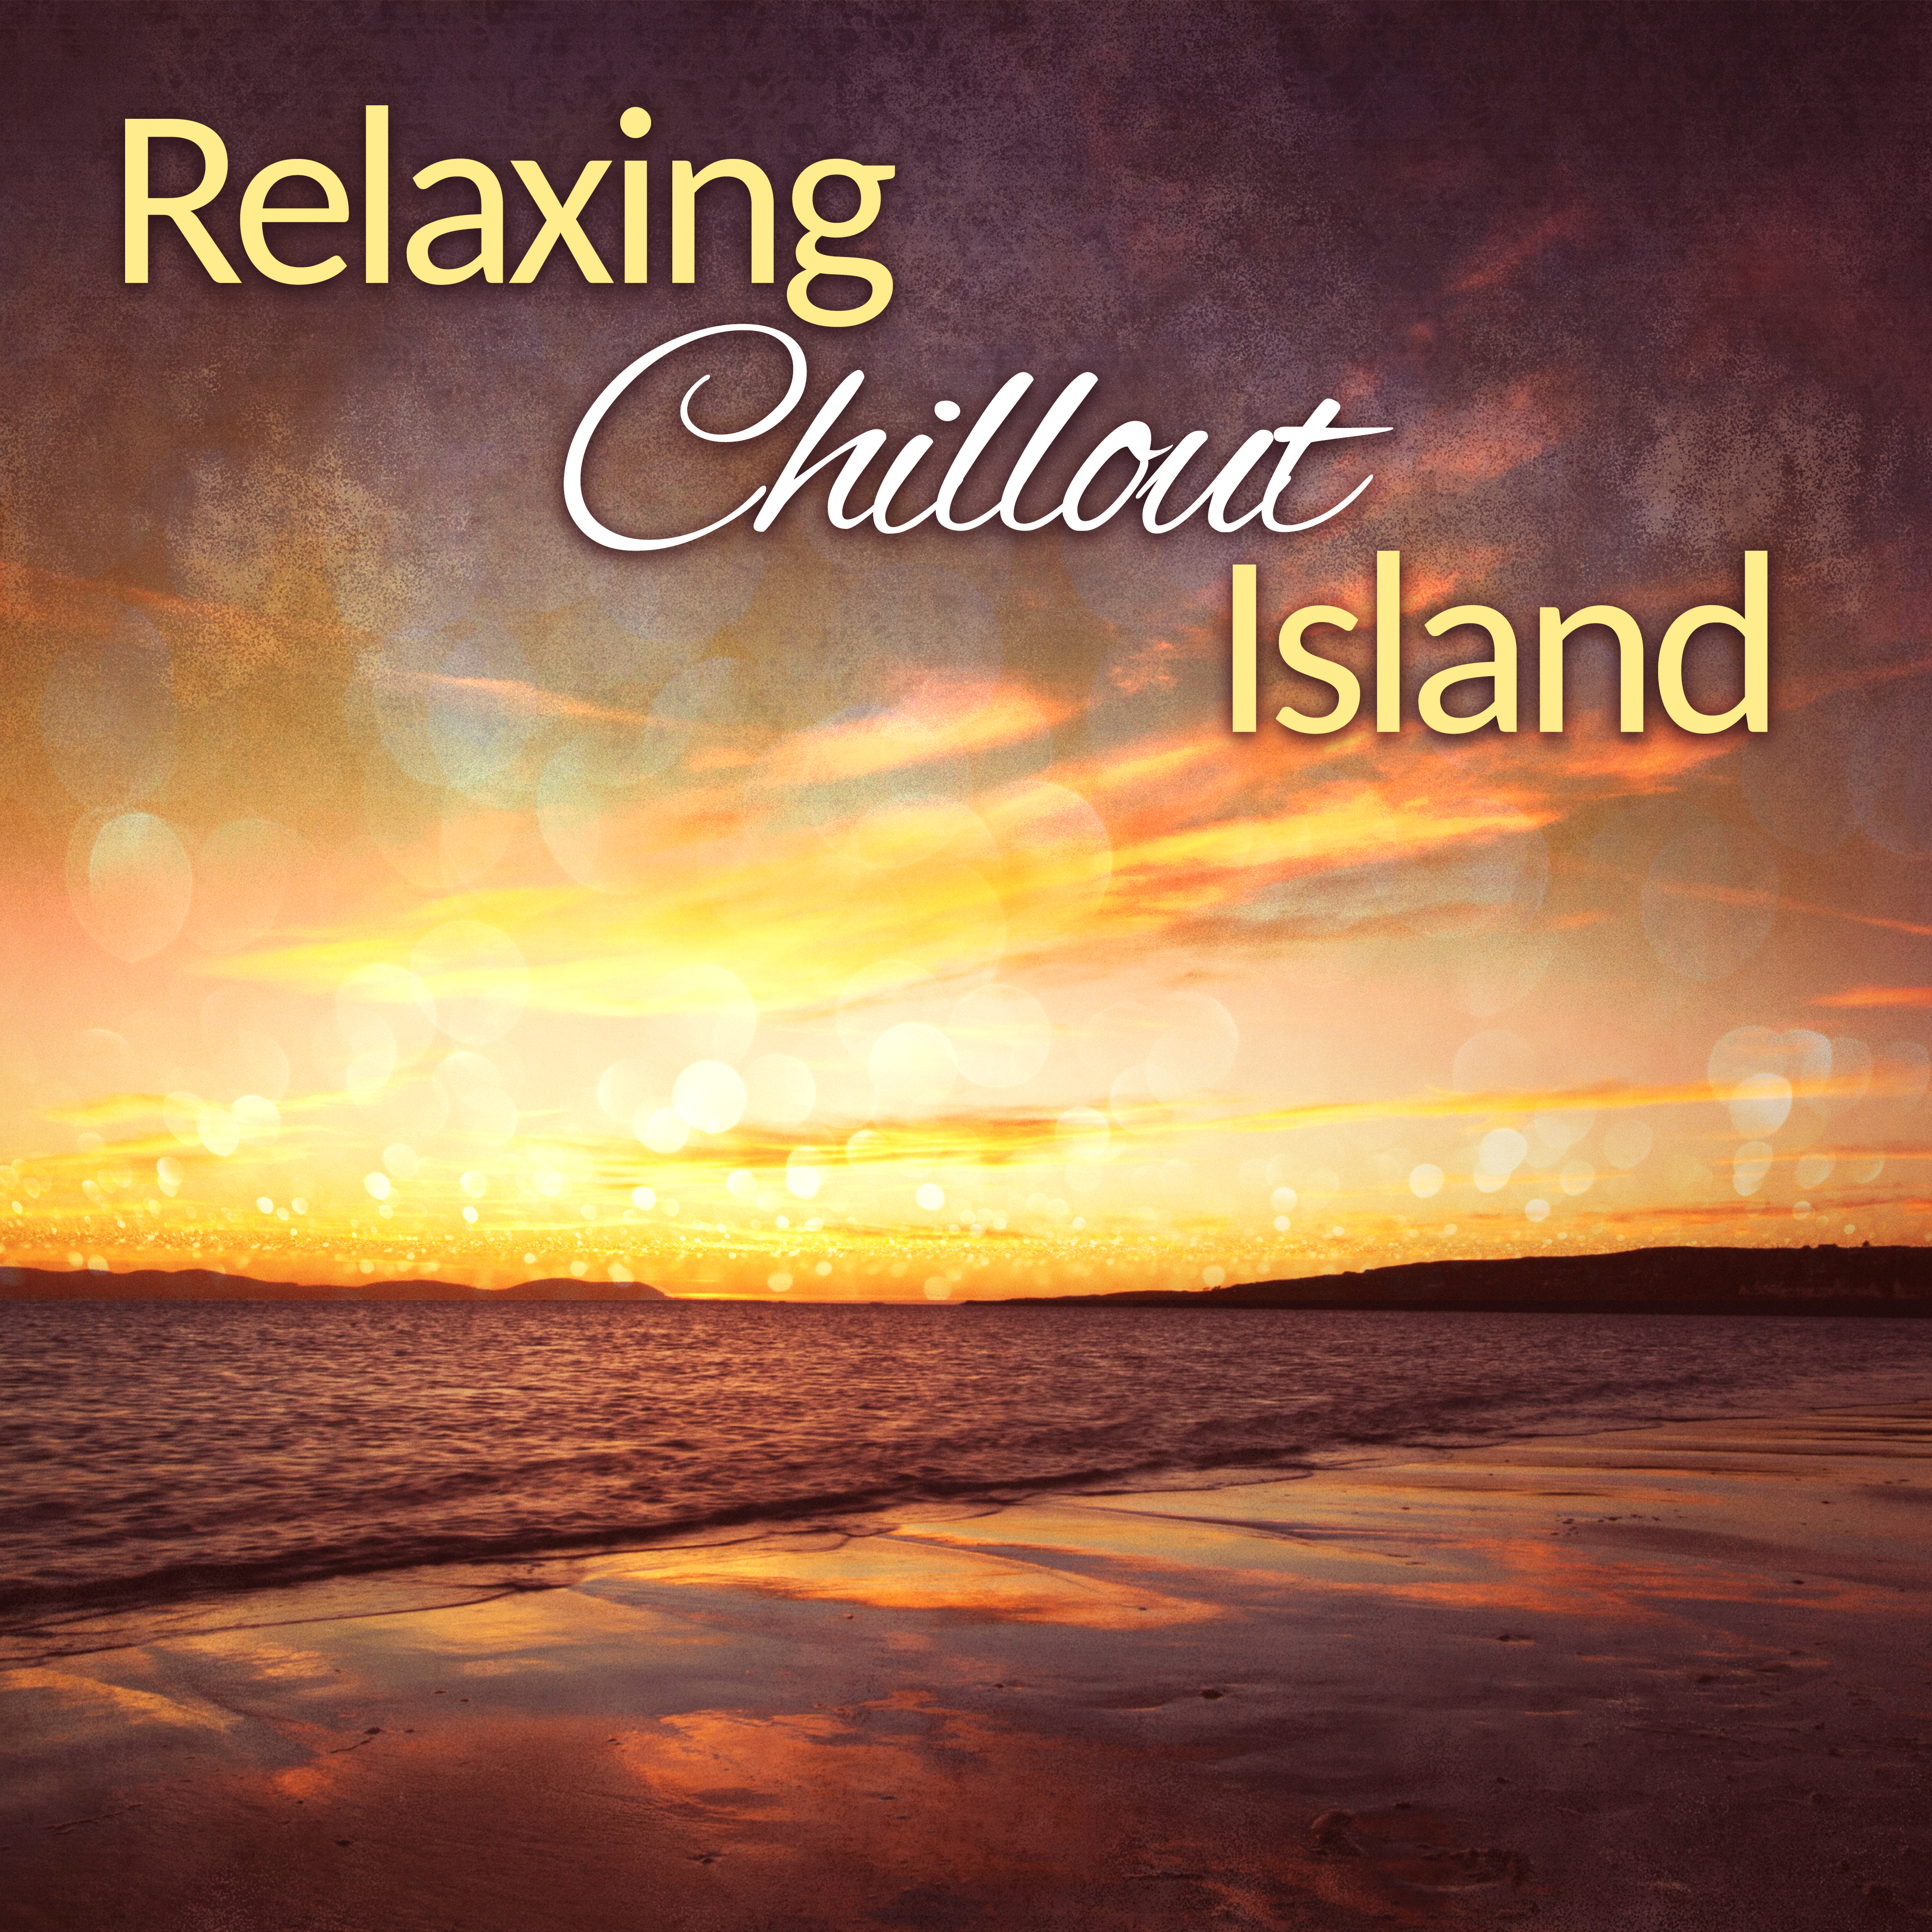 Relaxing Chillout Island – Smooth Sounds to Rest, Relaxing Music, Tropical Lounge, Chill Out Vibes